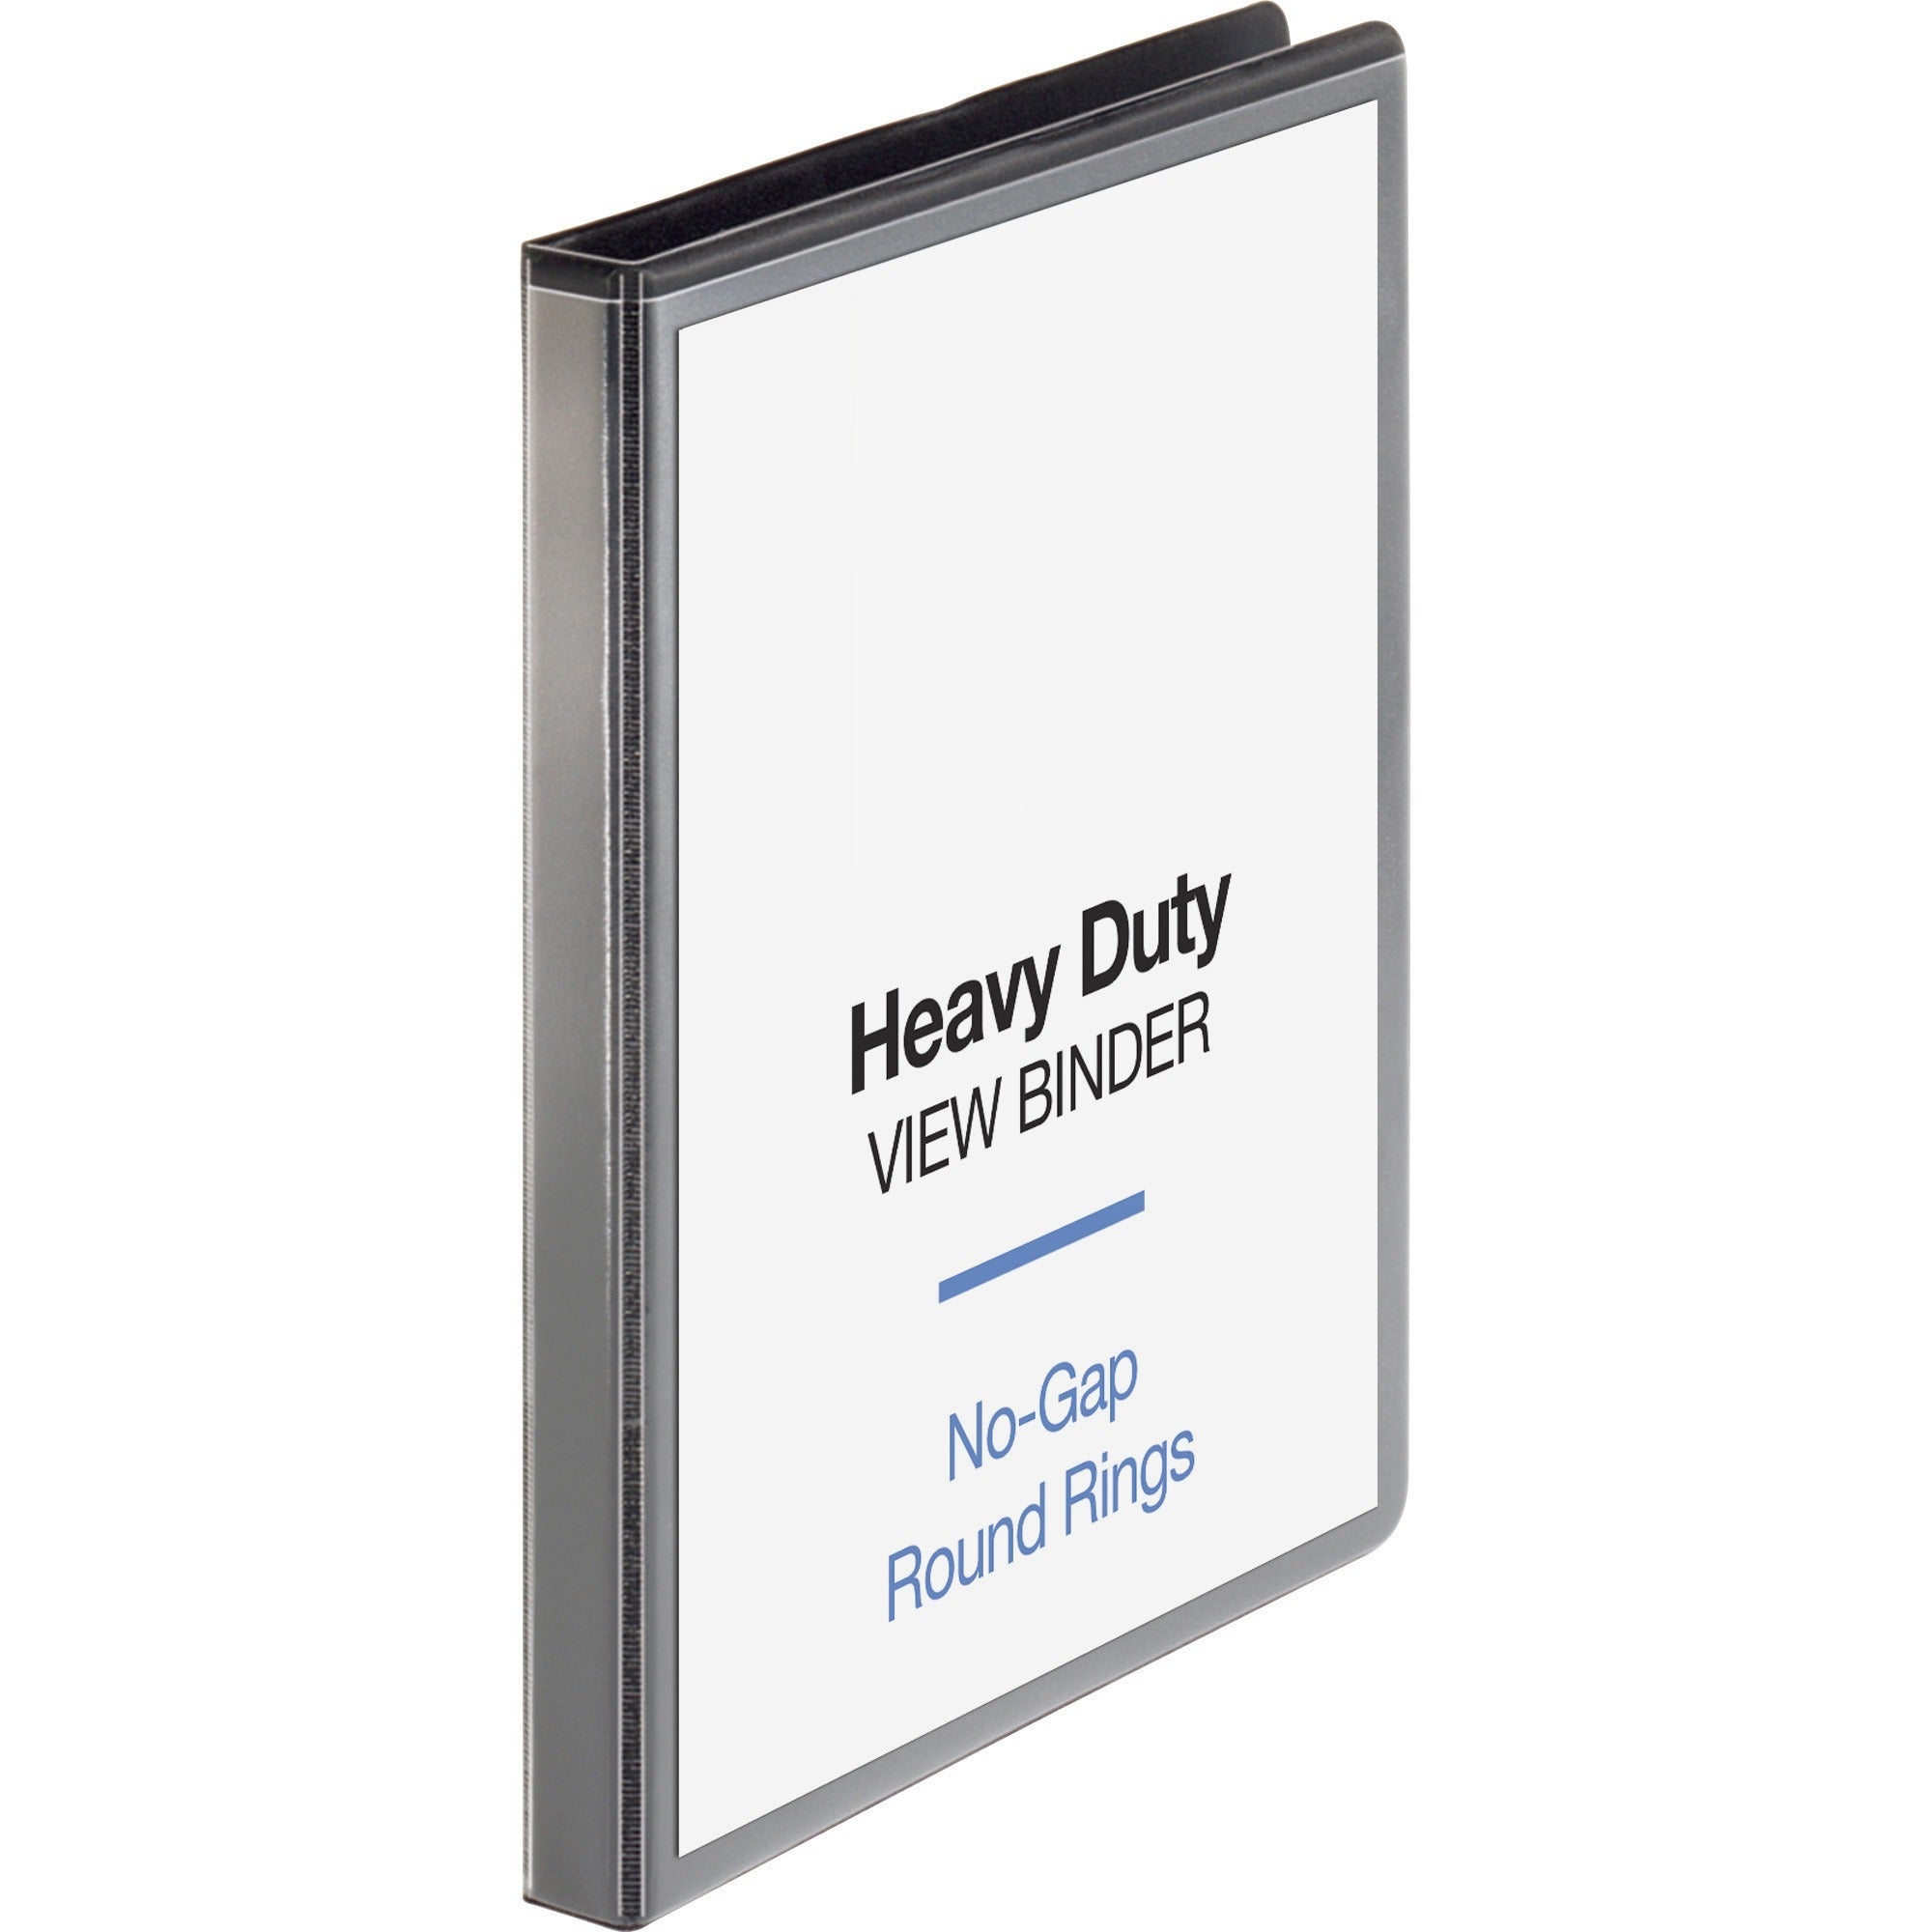 business-source-heavy-duty-view-binder-1-2-binder-capacity-letter-8-1-2-x-11-sheet-size-125-sheet-capacity-round-ring-fasteners-2-internal-pockets-polypropylene-chipboard-black-heavy-duty-wrinkle-free-gap-free-ring-non-gl_bsn19550 - 1